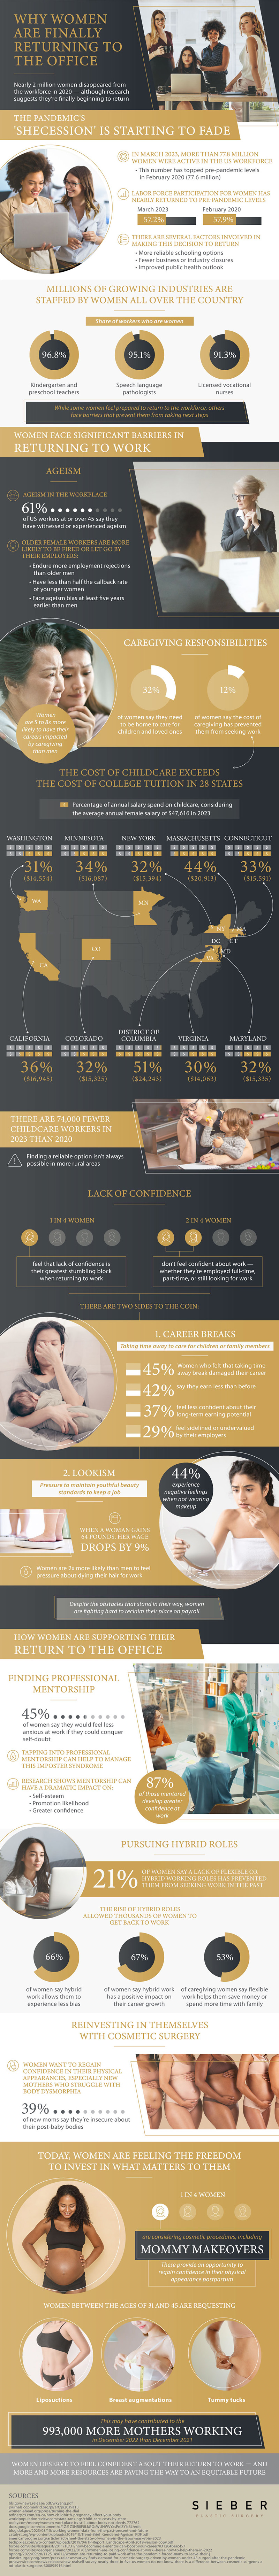 Why Women Are Finally Returning To The Office - Infographic